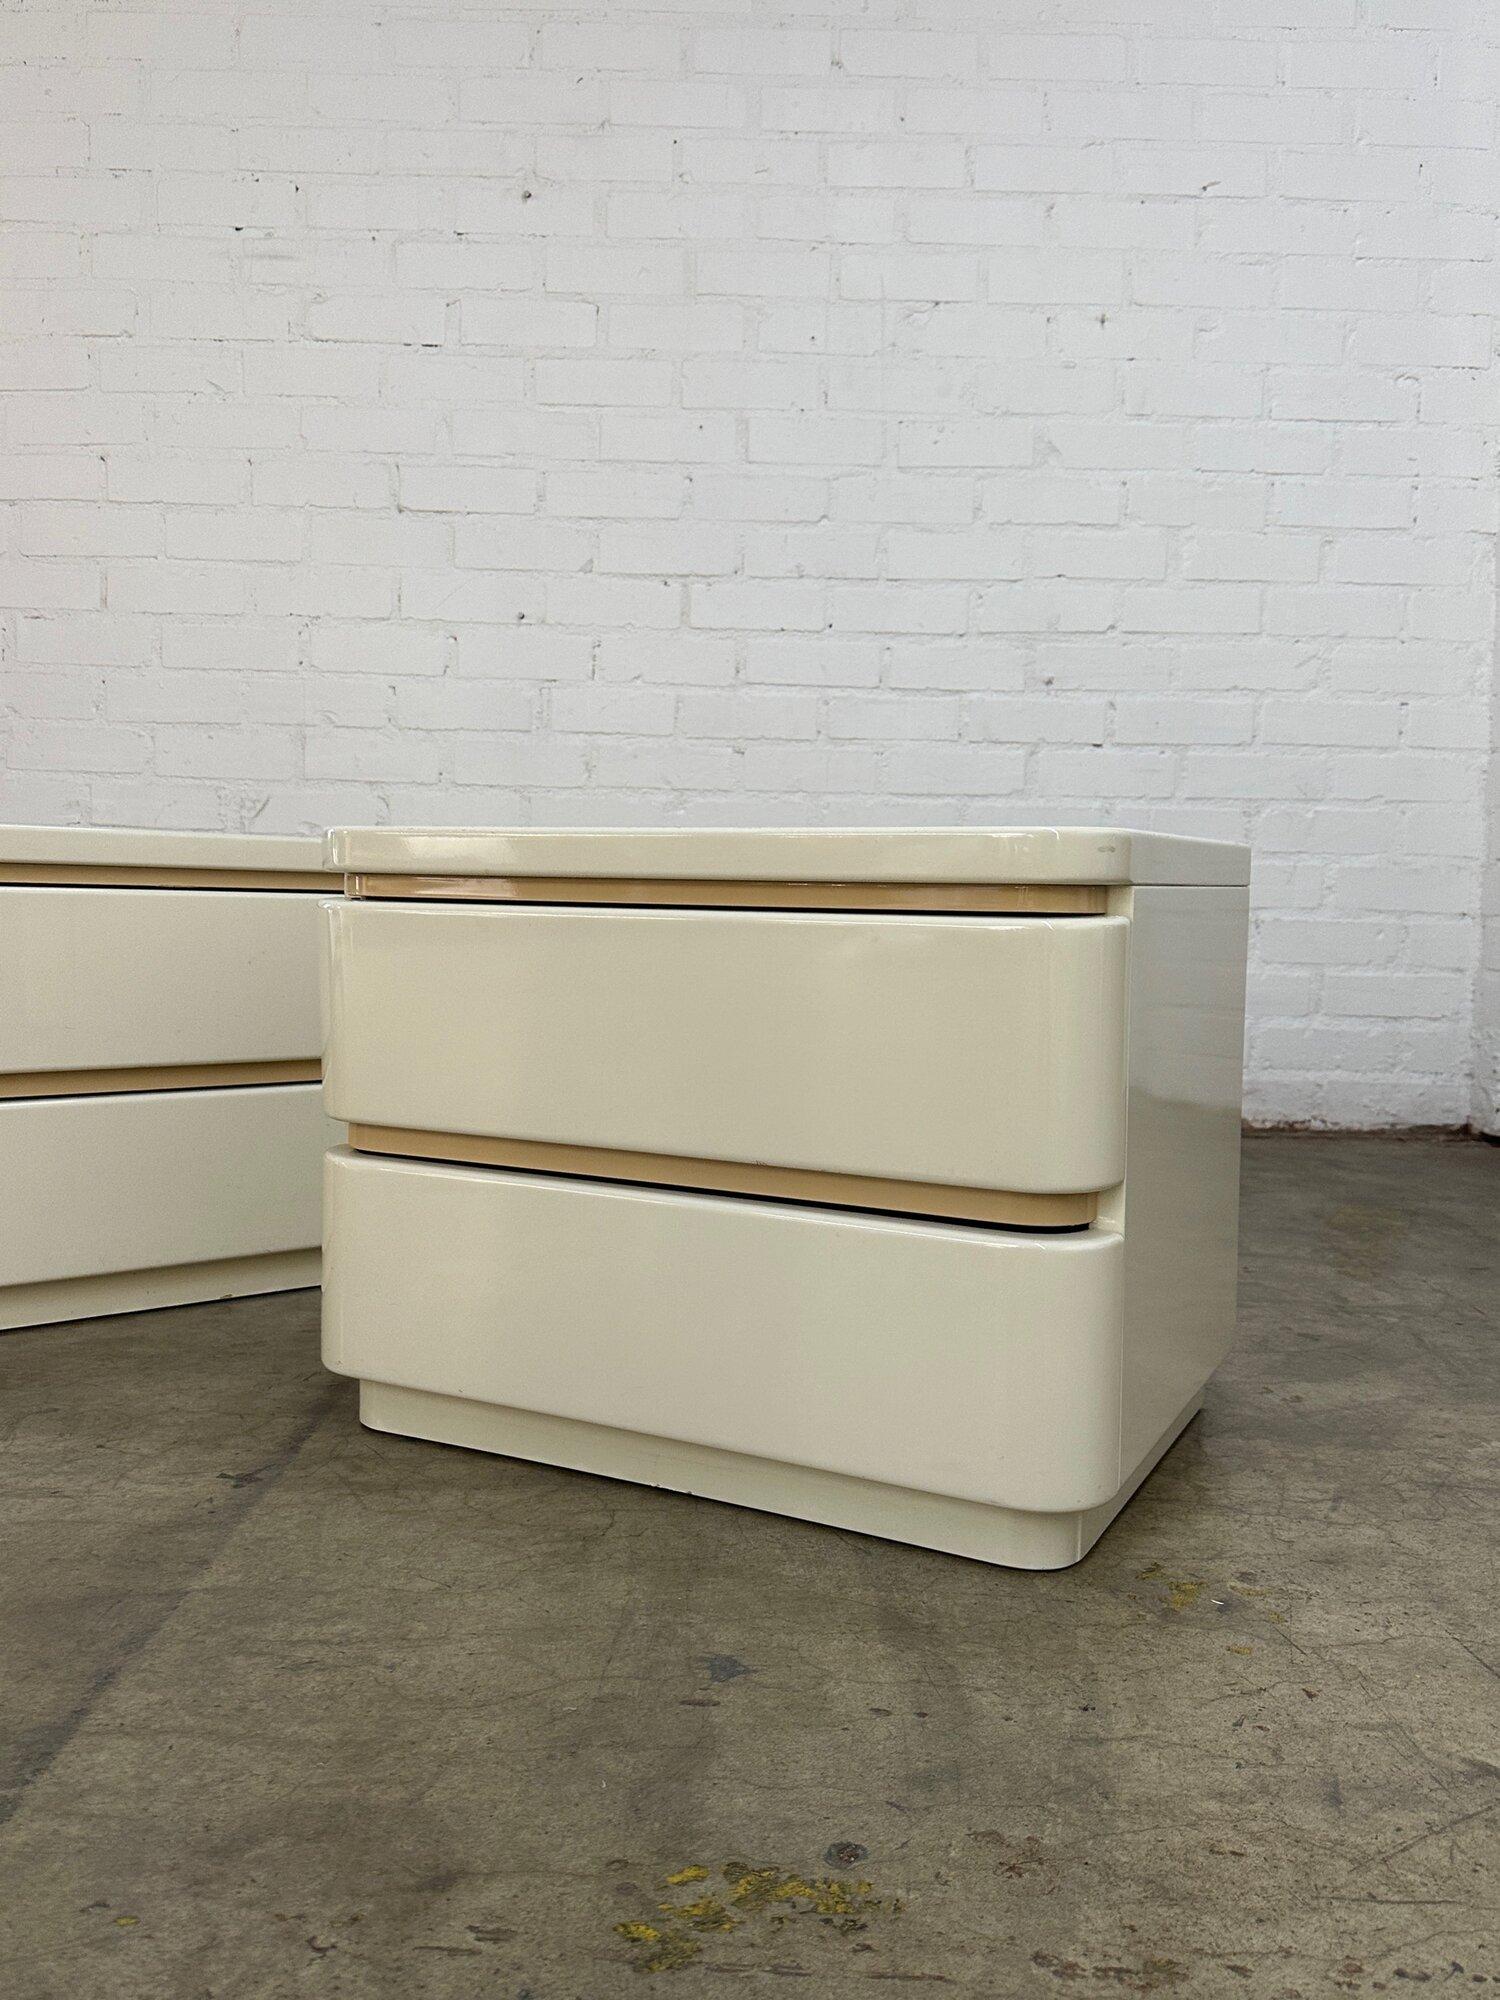 W27 D18.5 H20.2

Pair of Postmodern off white lacquered nightstands by Reubens. Each nightstand features 2 sculpted drawers. Item is fully functional, sound and sturdy

Price is for Pair*

